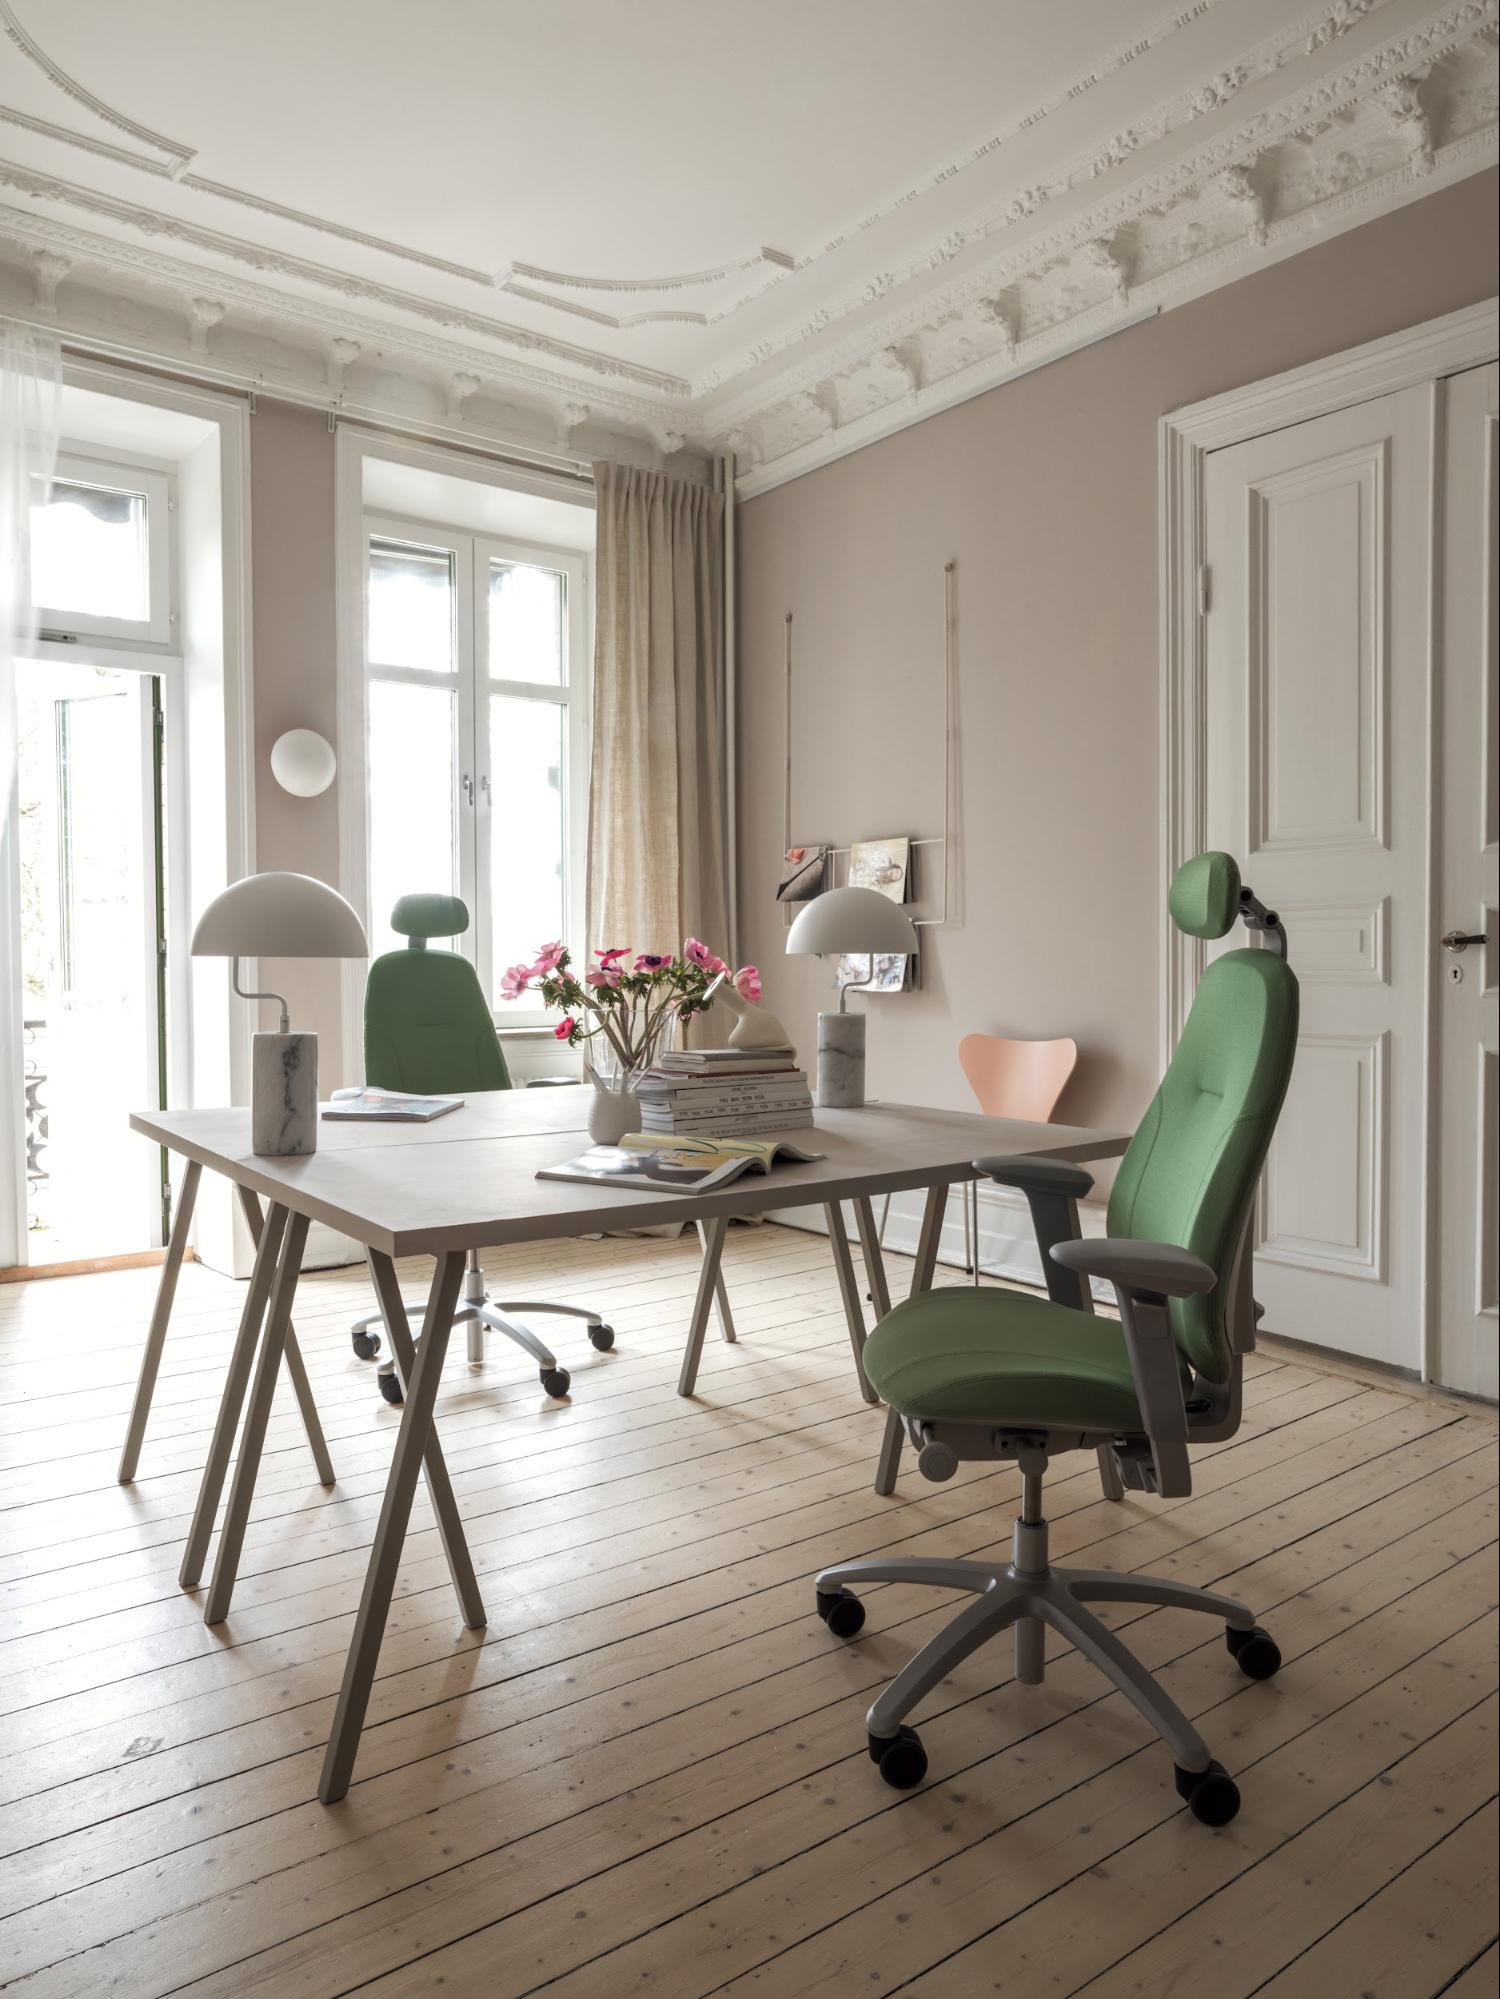 Image of a rose colored office with green office chairs.